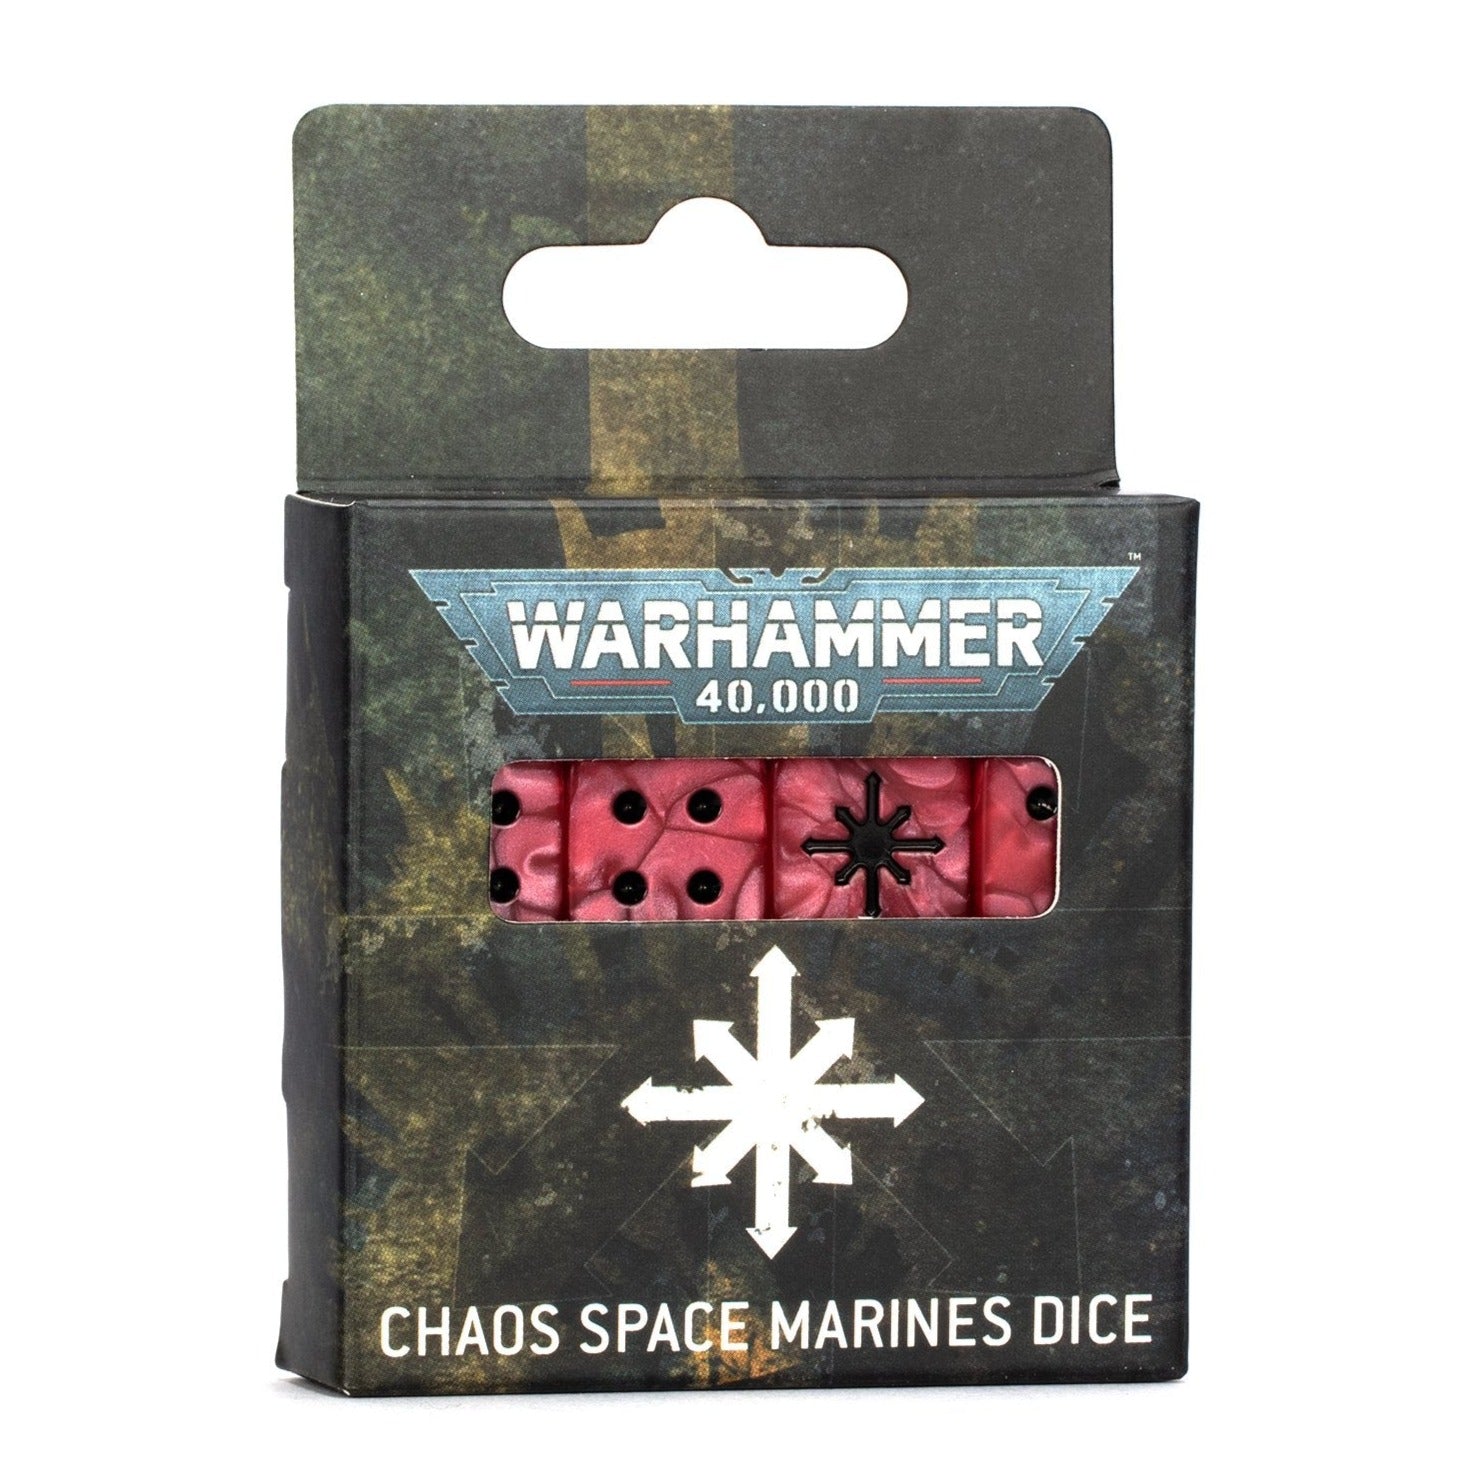 Warhammer 40000: Chaos Space Marines Dice - Release Date 25/5/24